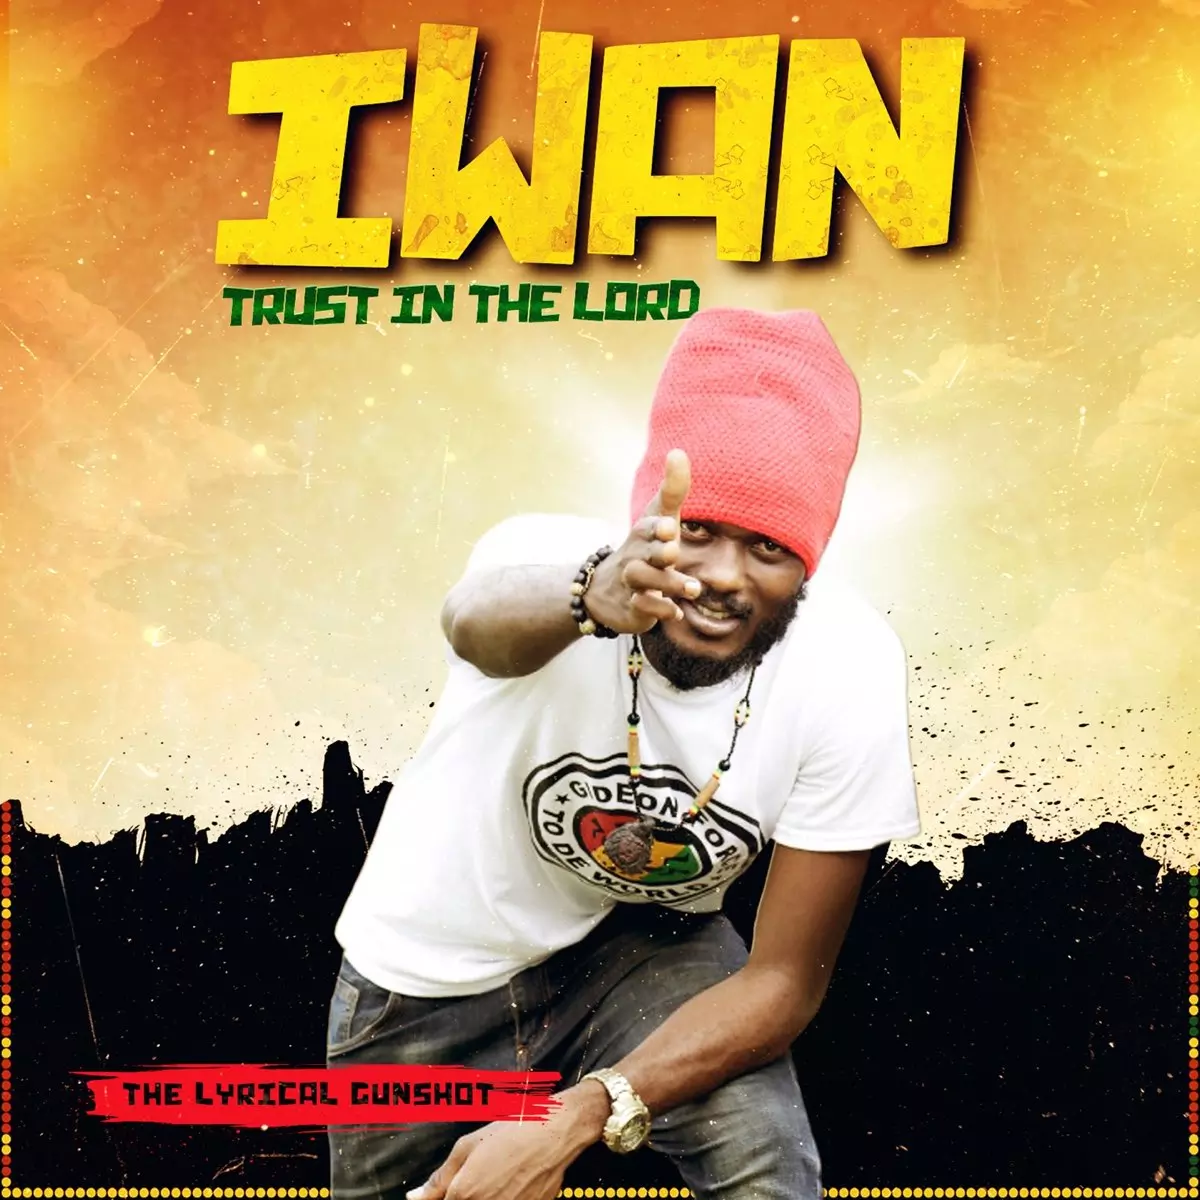 Trust in the Lord (The Lyrical Gunshot) by Iwan on Apple Music